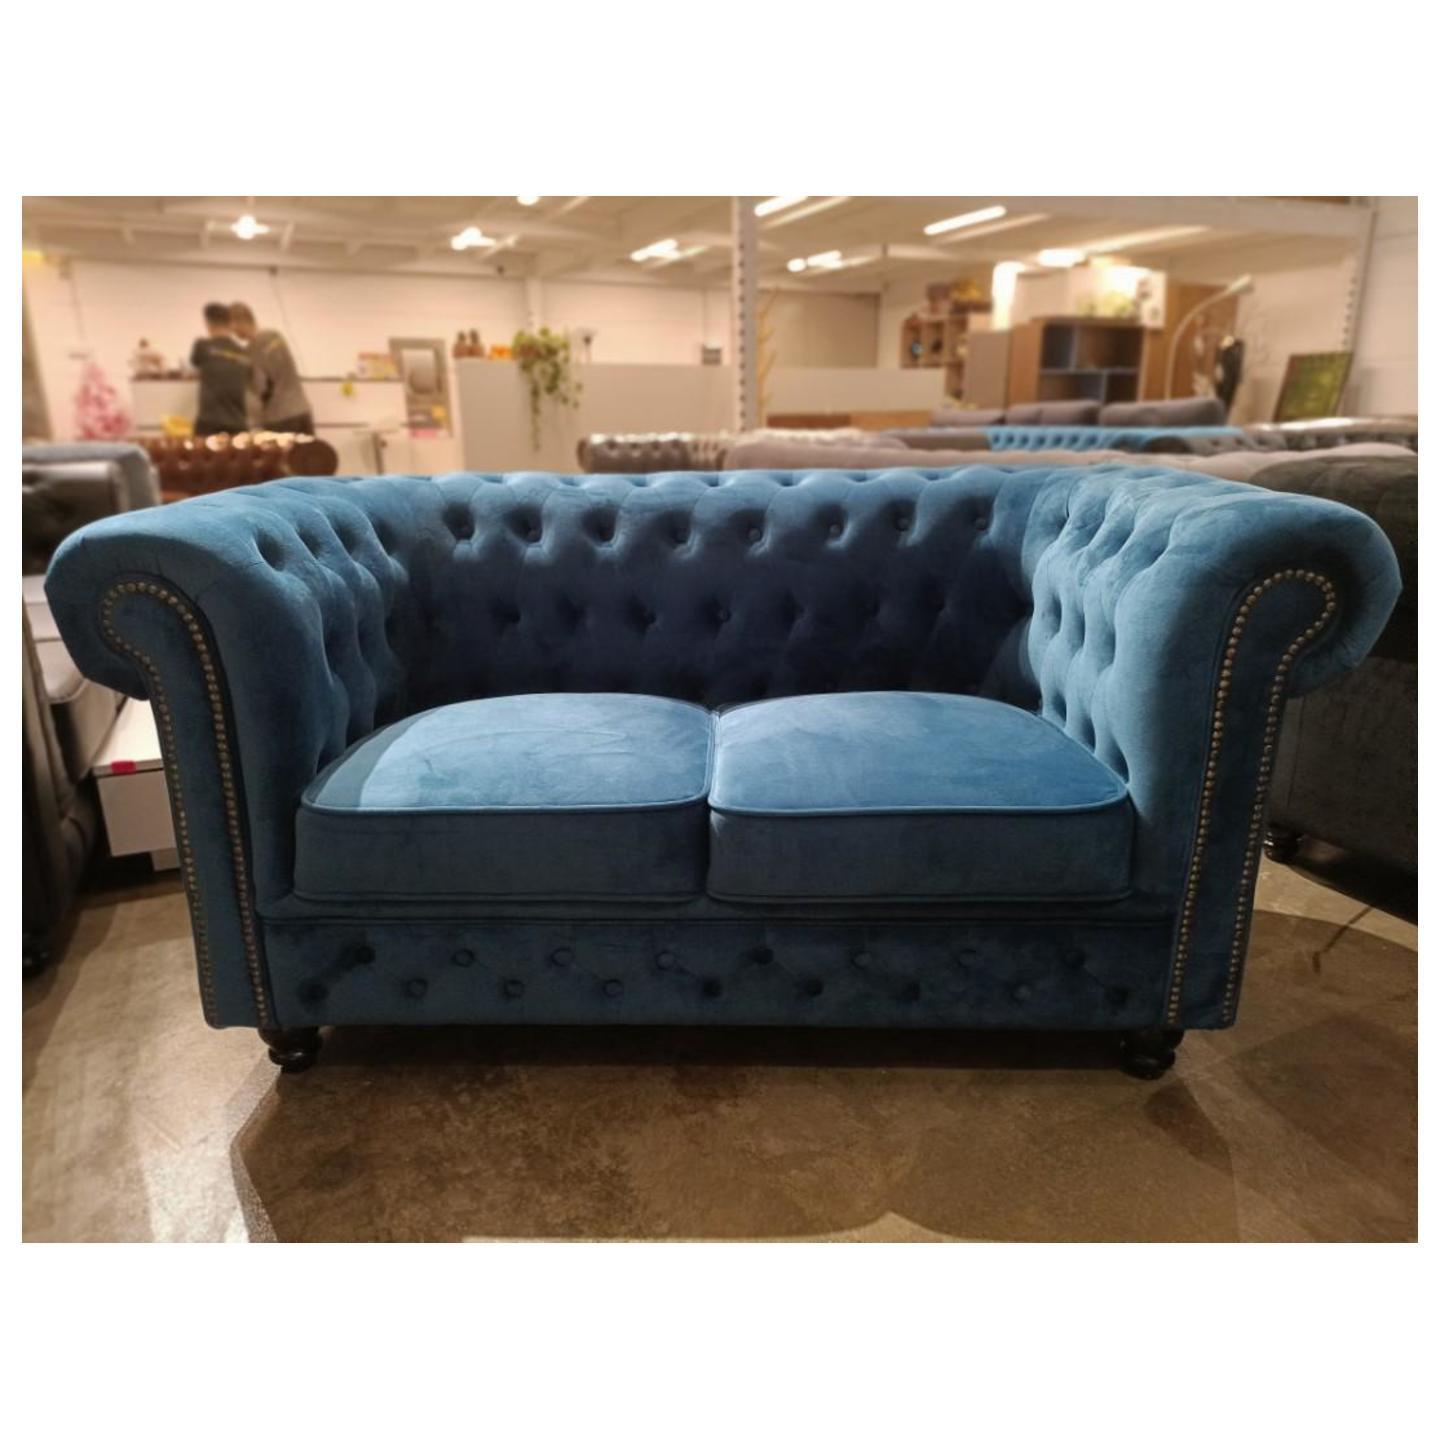 SALVADORE X 2 Seater Chesterfield Sofa in MIDNIGHT BLUE VELVET